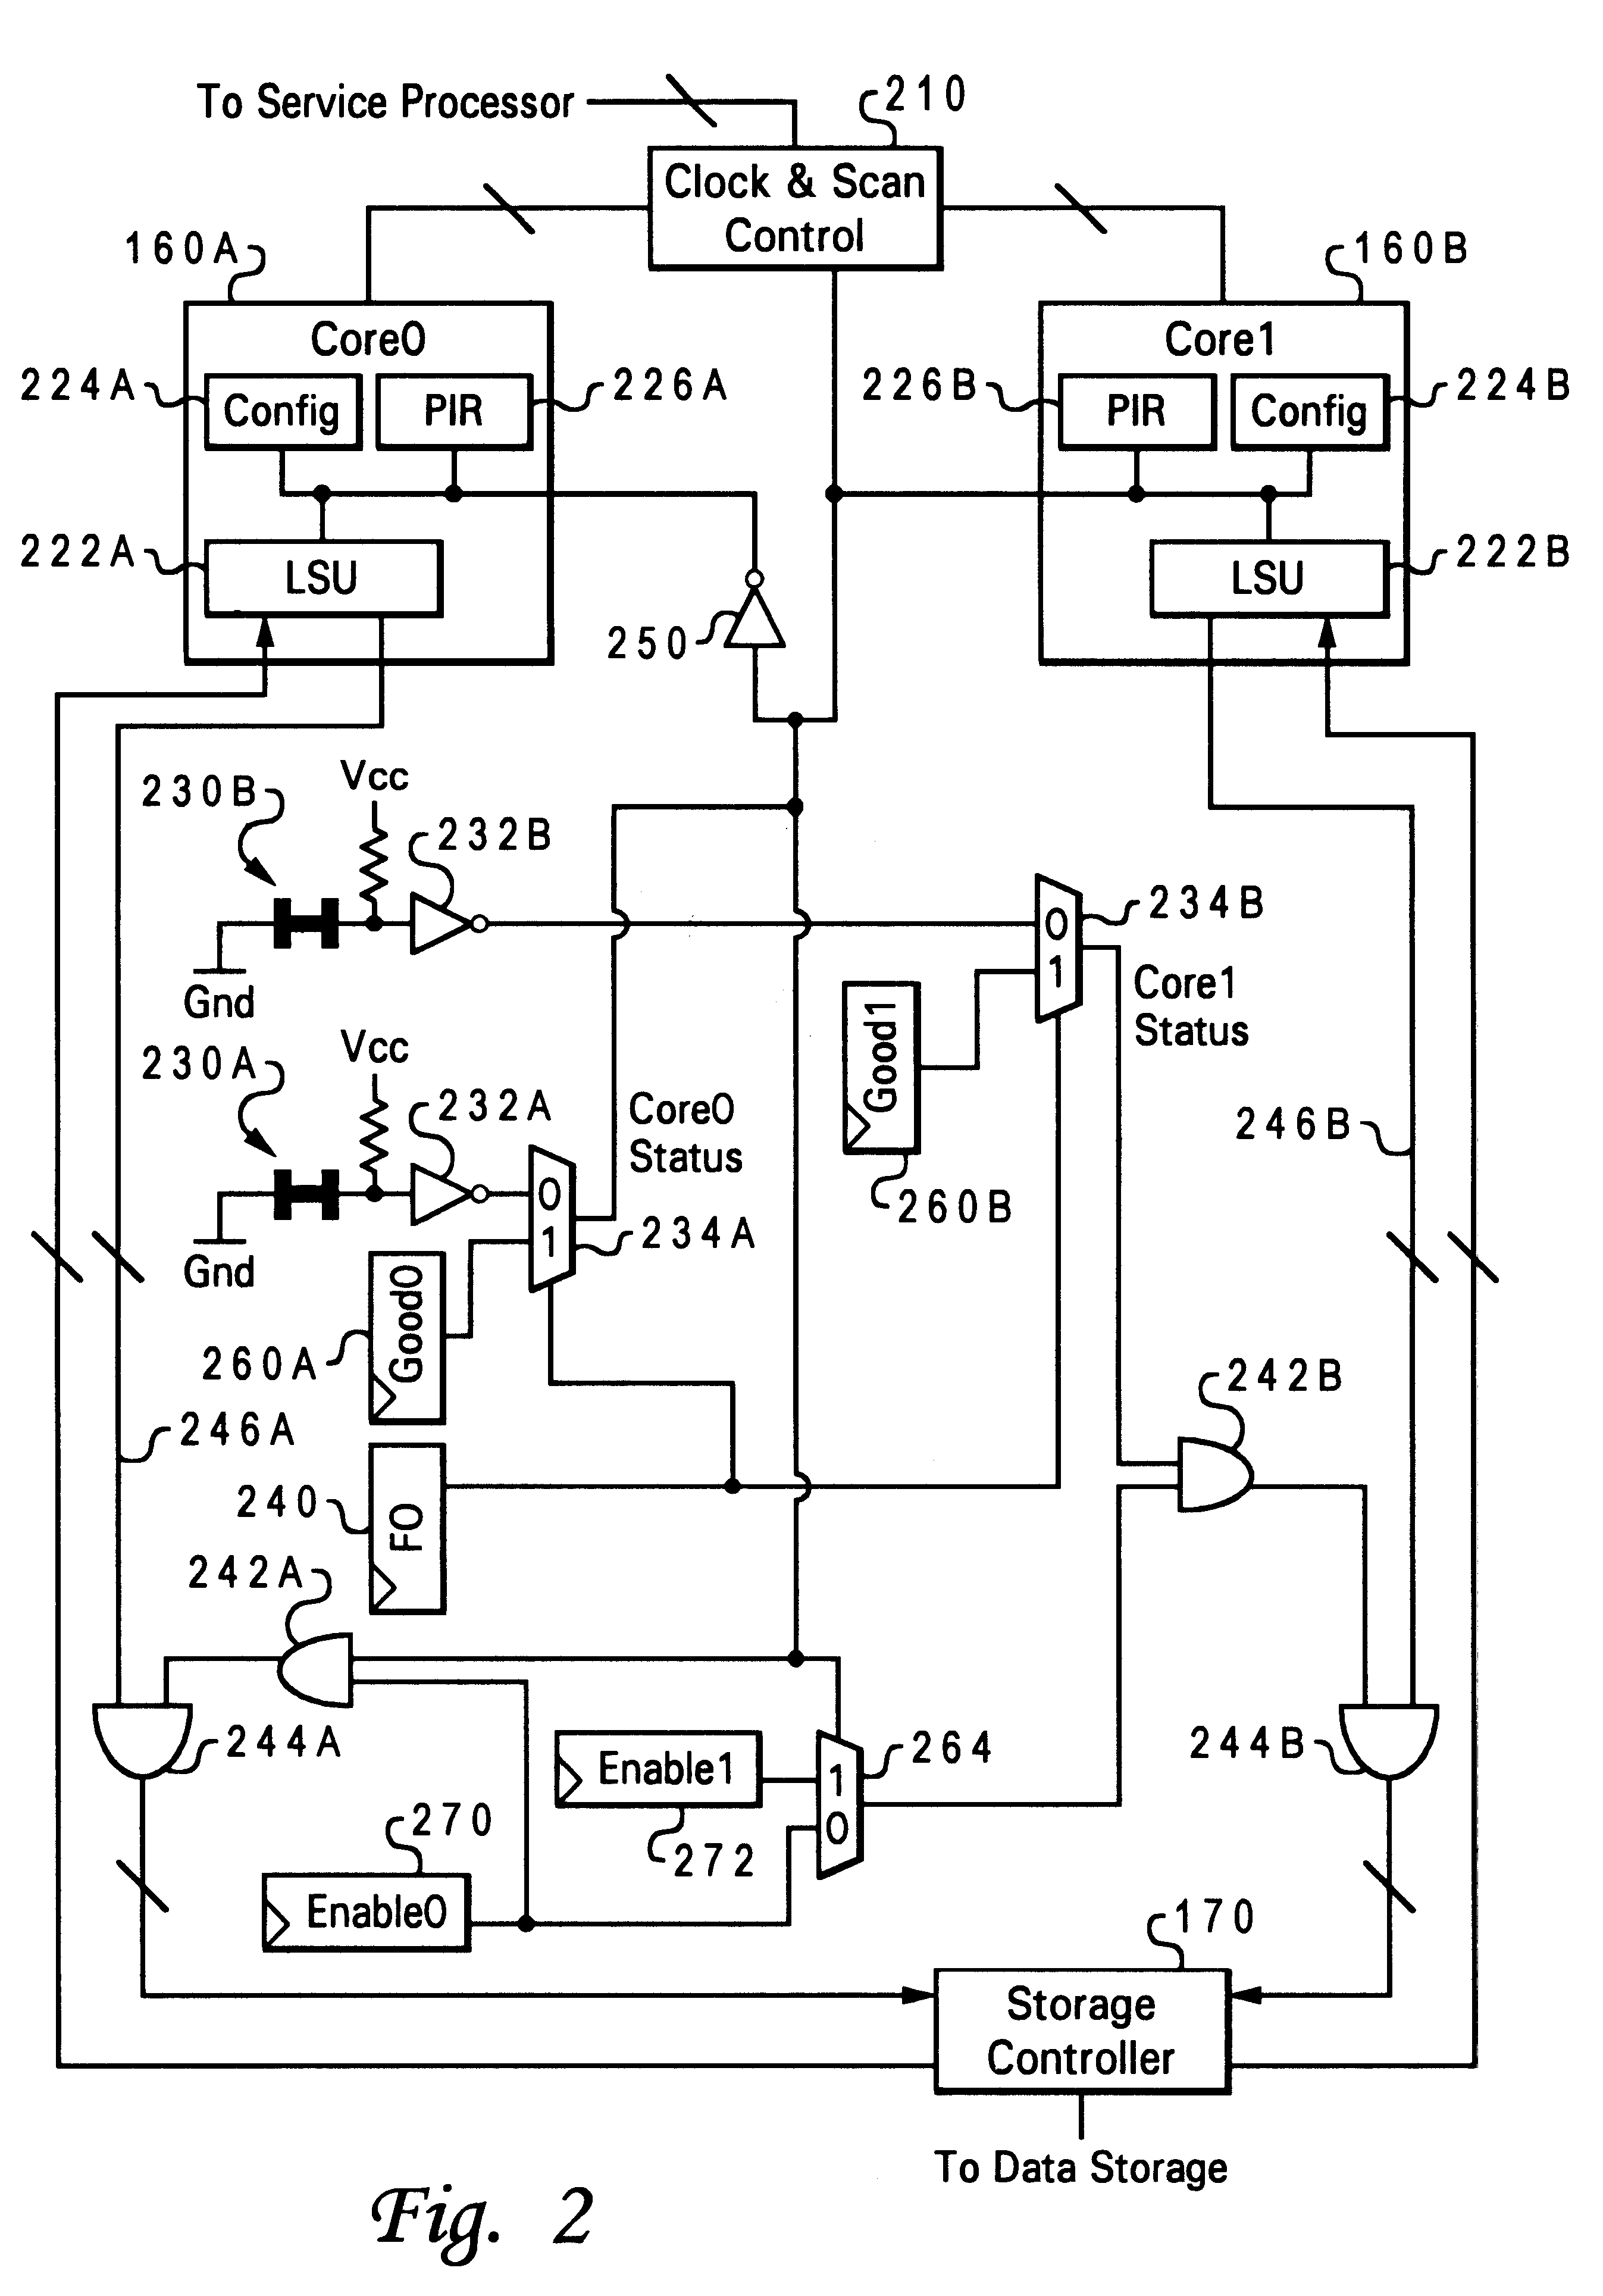 Method and system for dynamically configuring a central processing unit with multiple processing cores